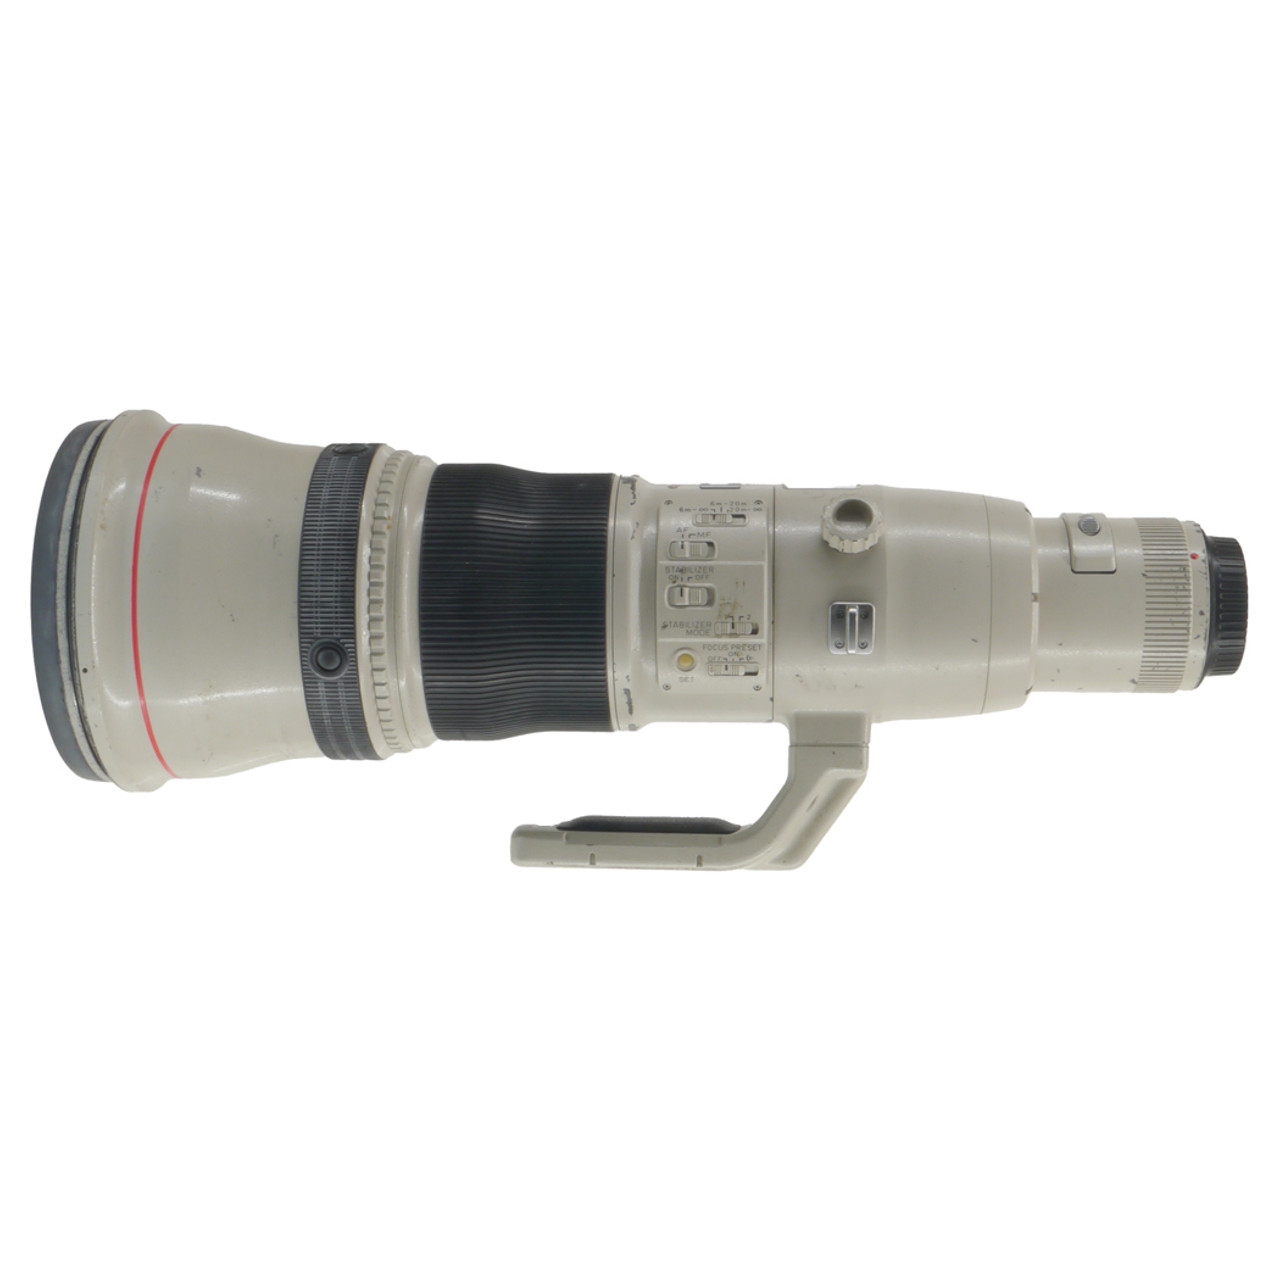 USED CANON EF 800MM F5.6 L IS